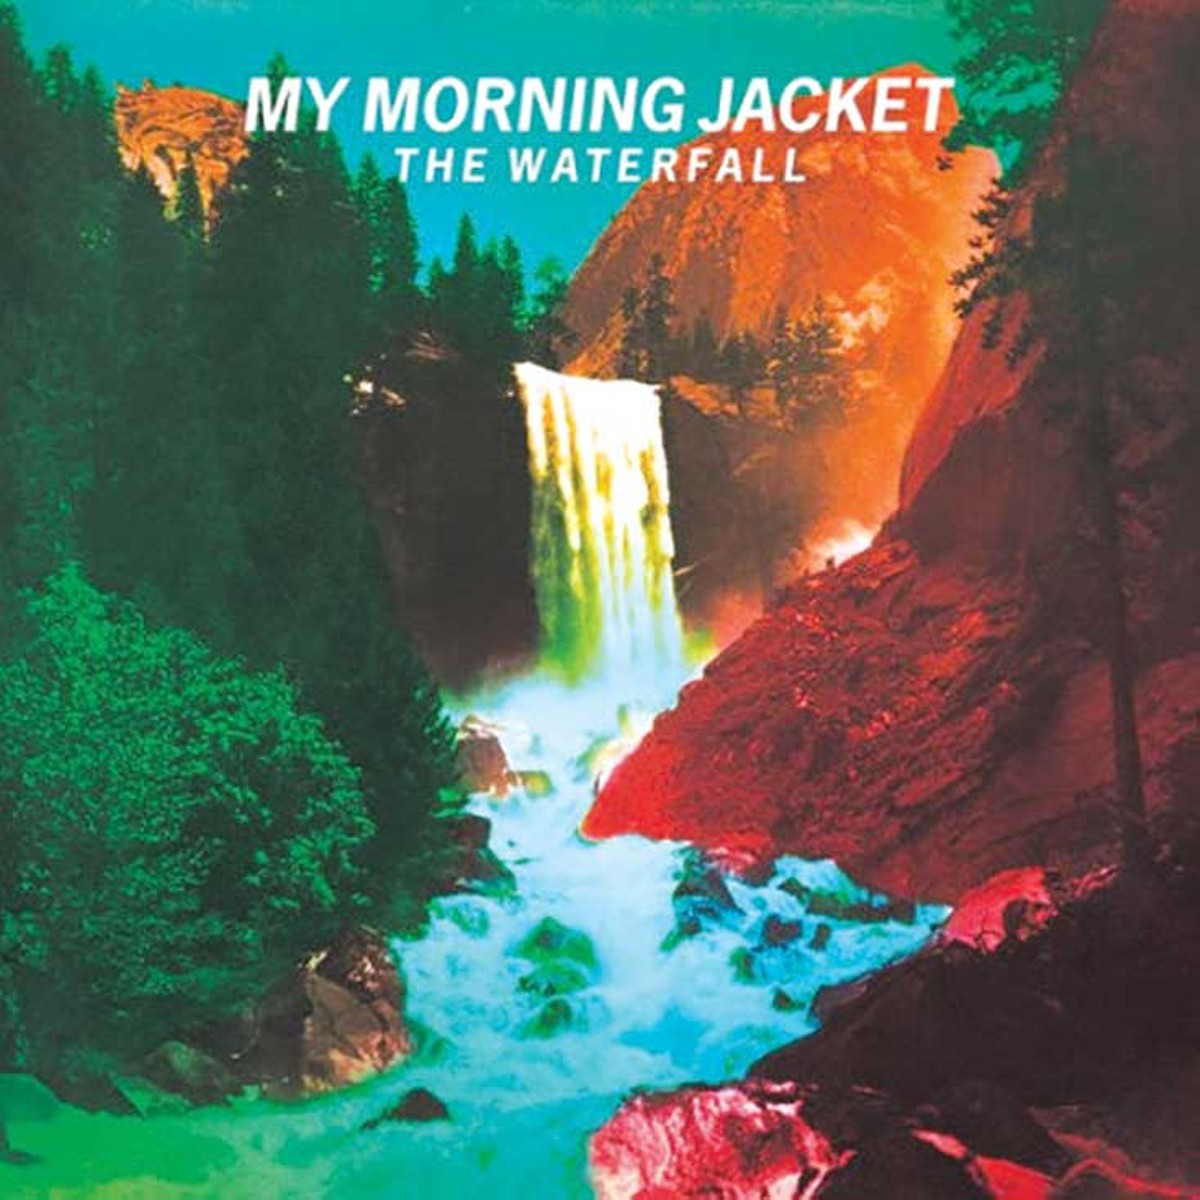 My Morning Jacket:  The Waterfall